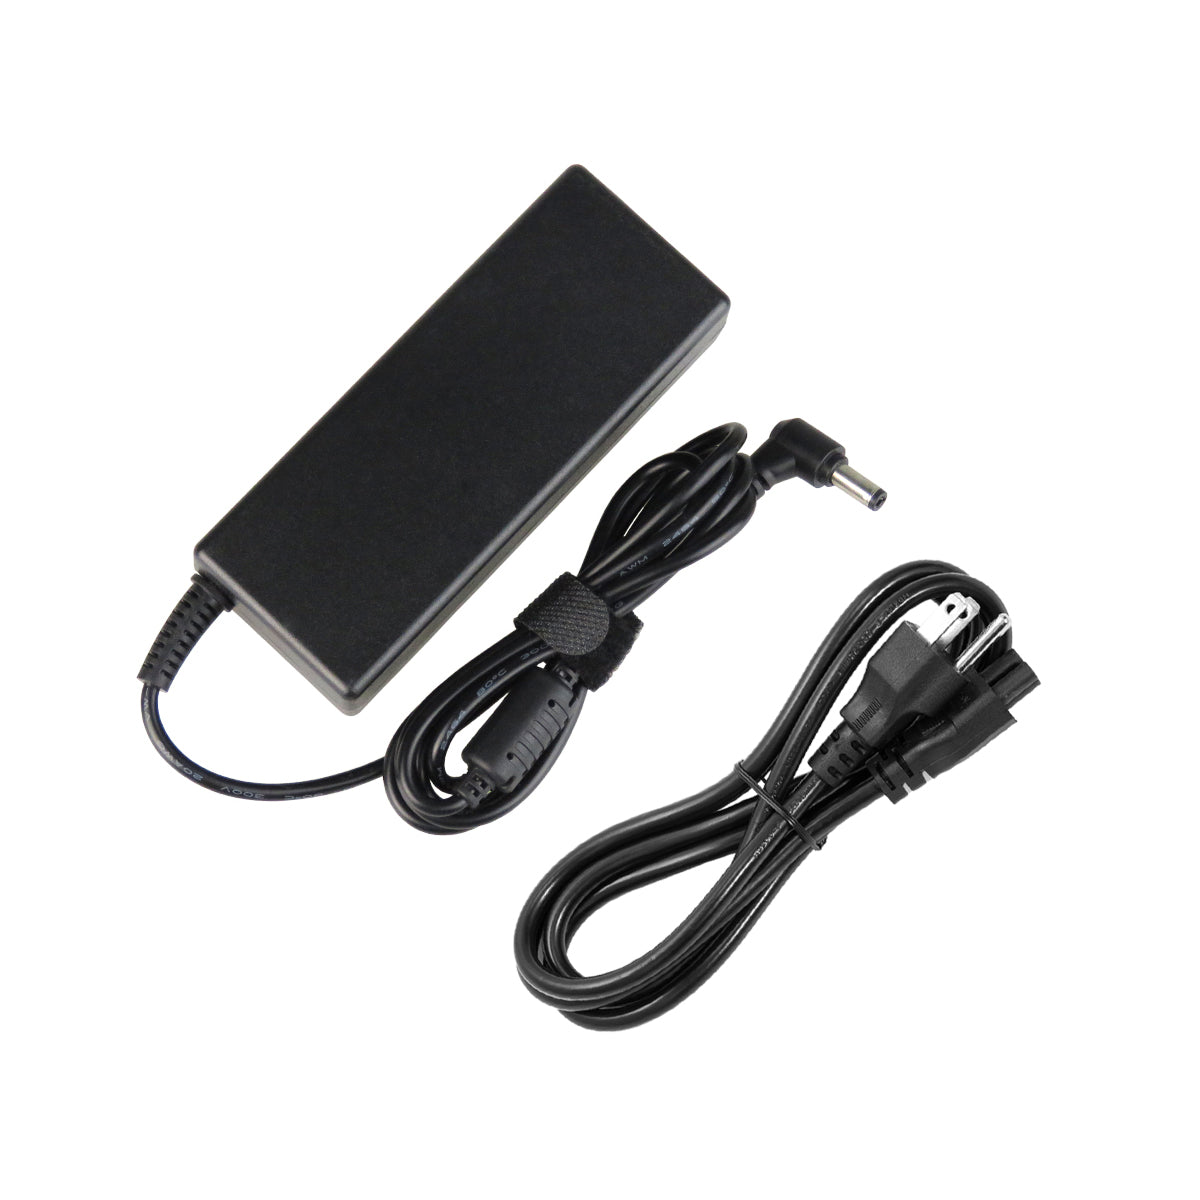 AC Adapter Charger for ASUS P53E Notebook.